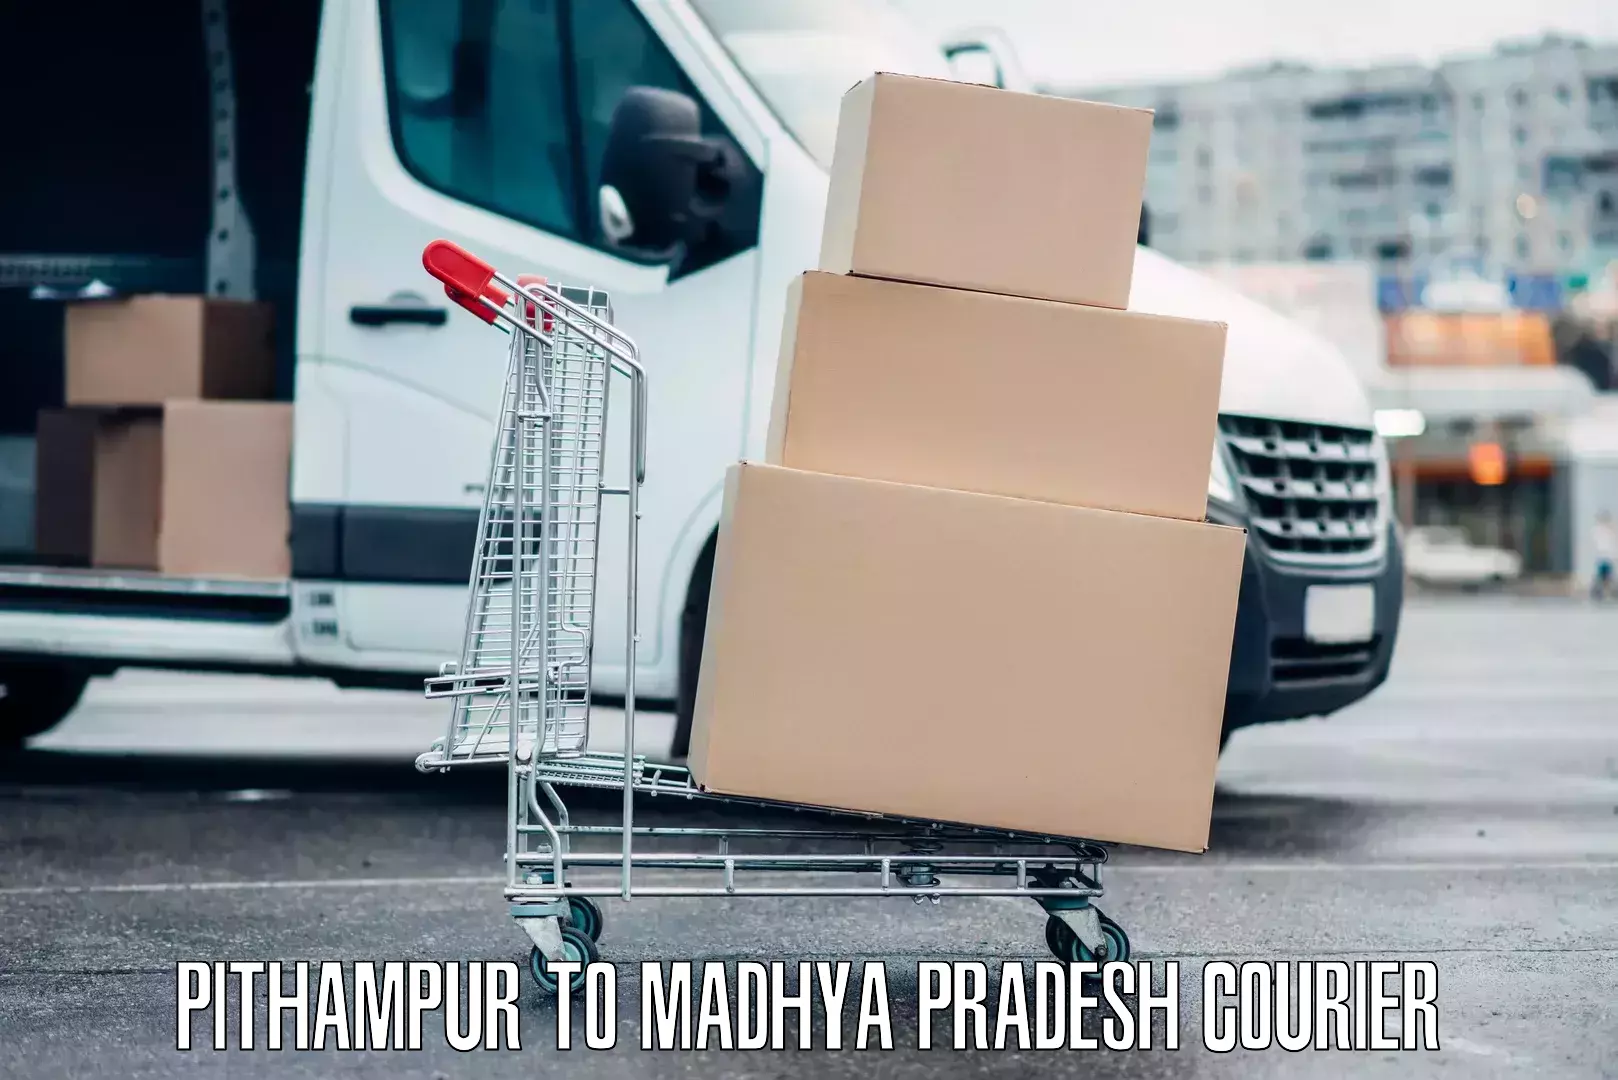 Luggage delivery system Pithampur to Madhya Pradesh